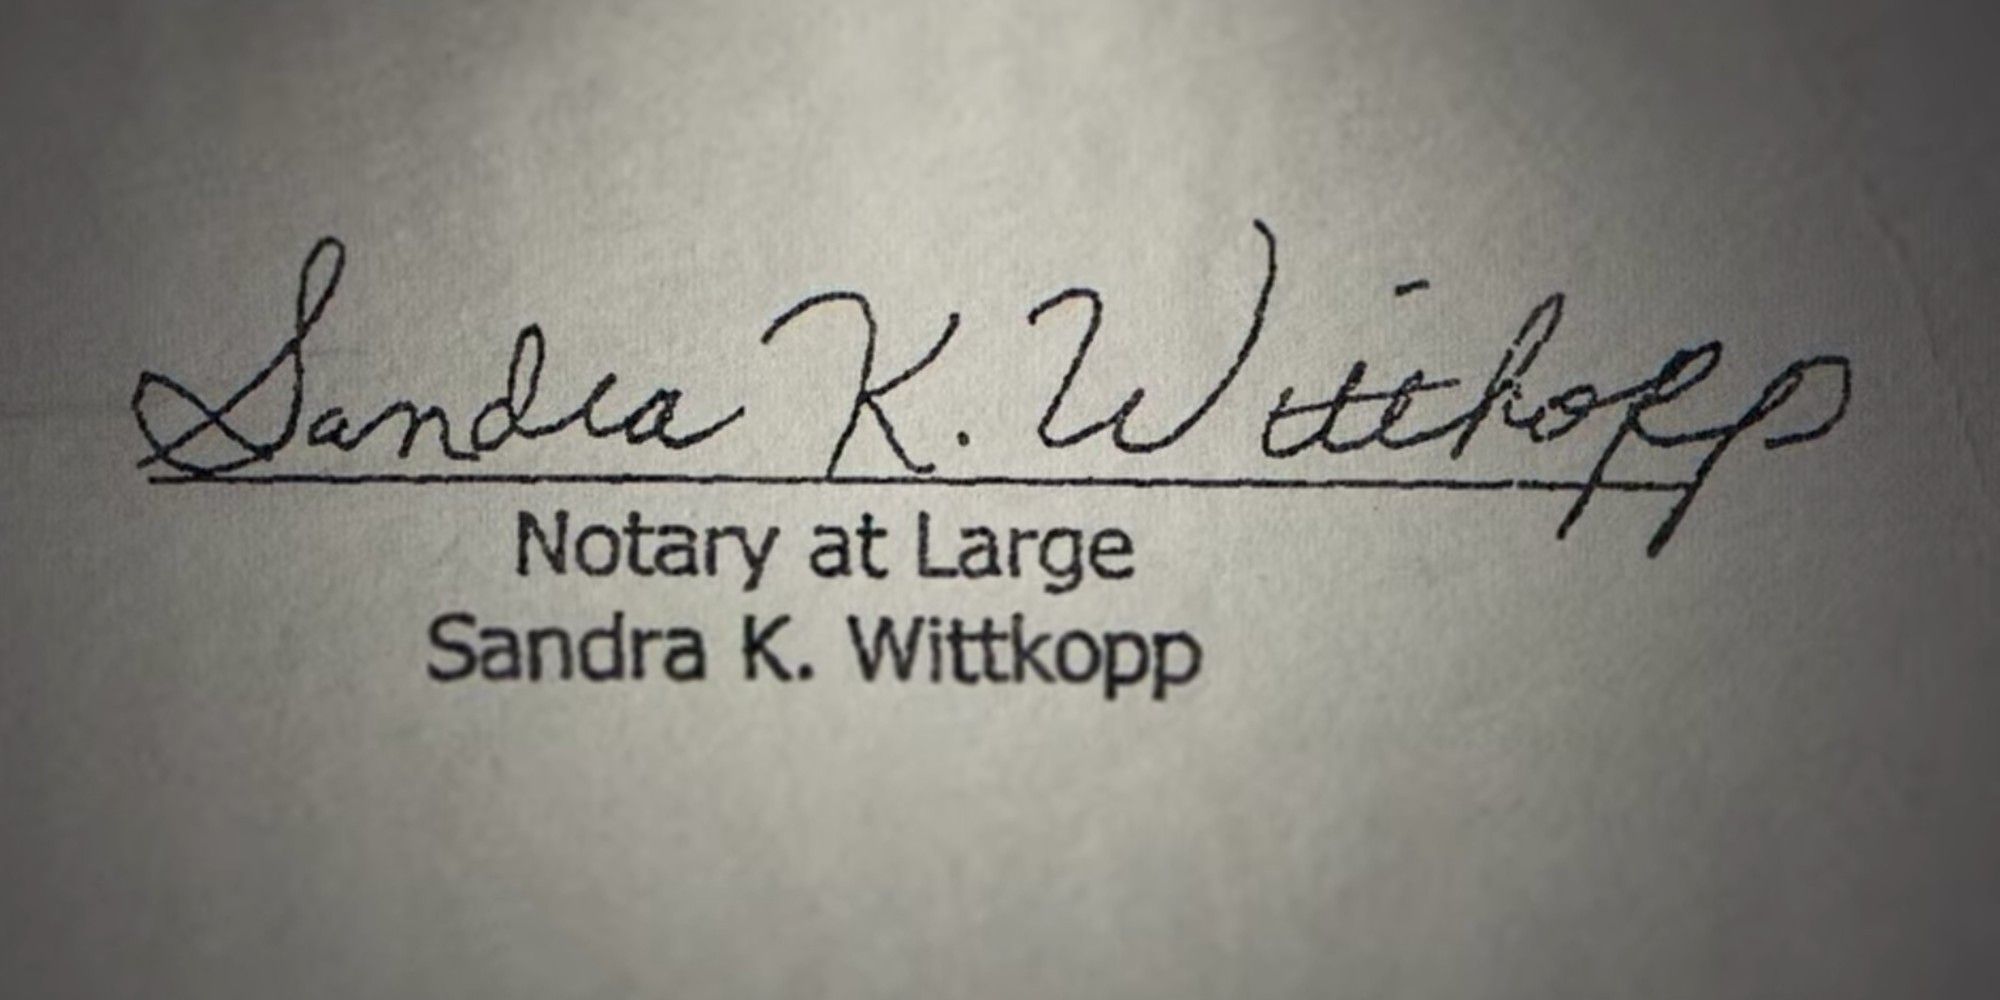 sandra wittkopp's allegedly forged signature